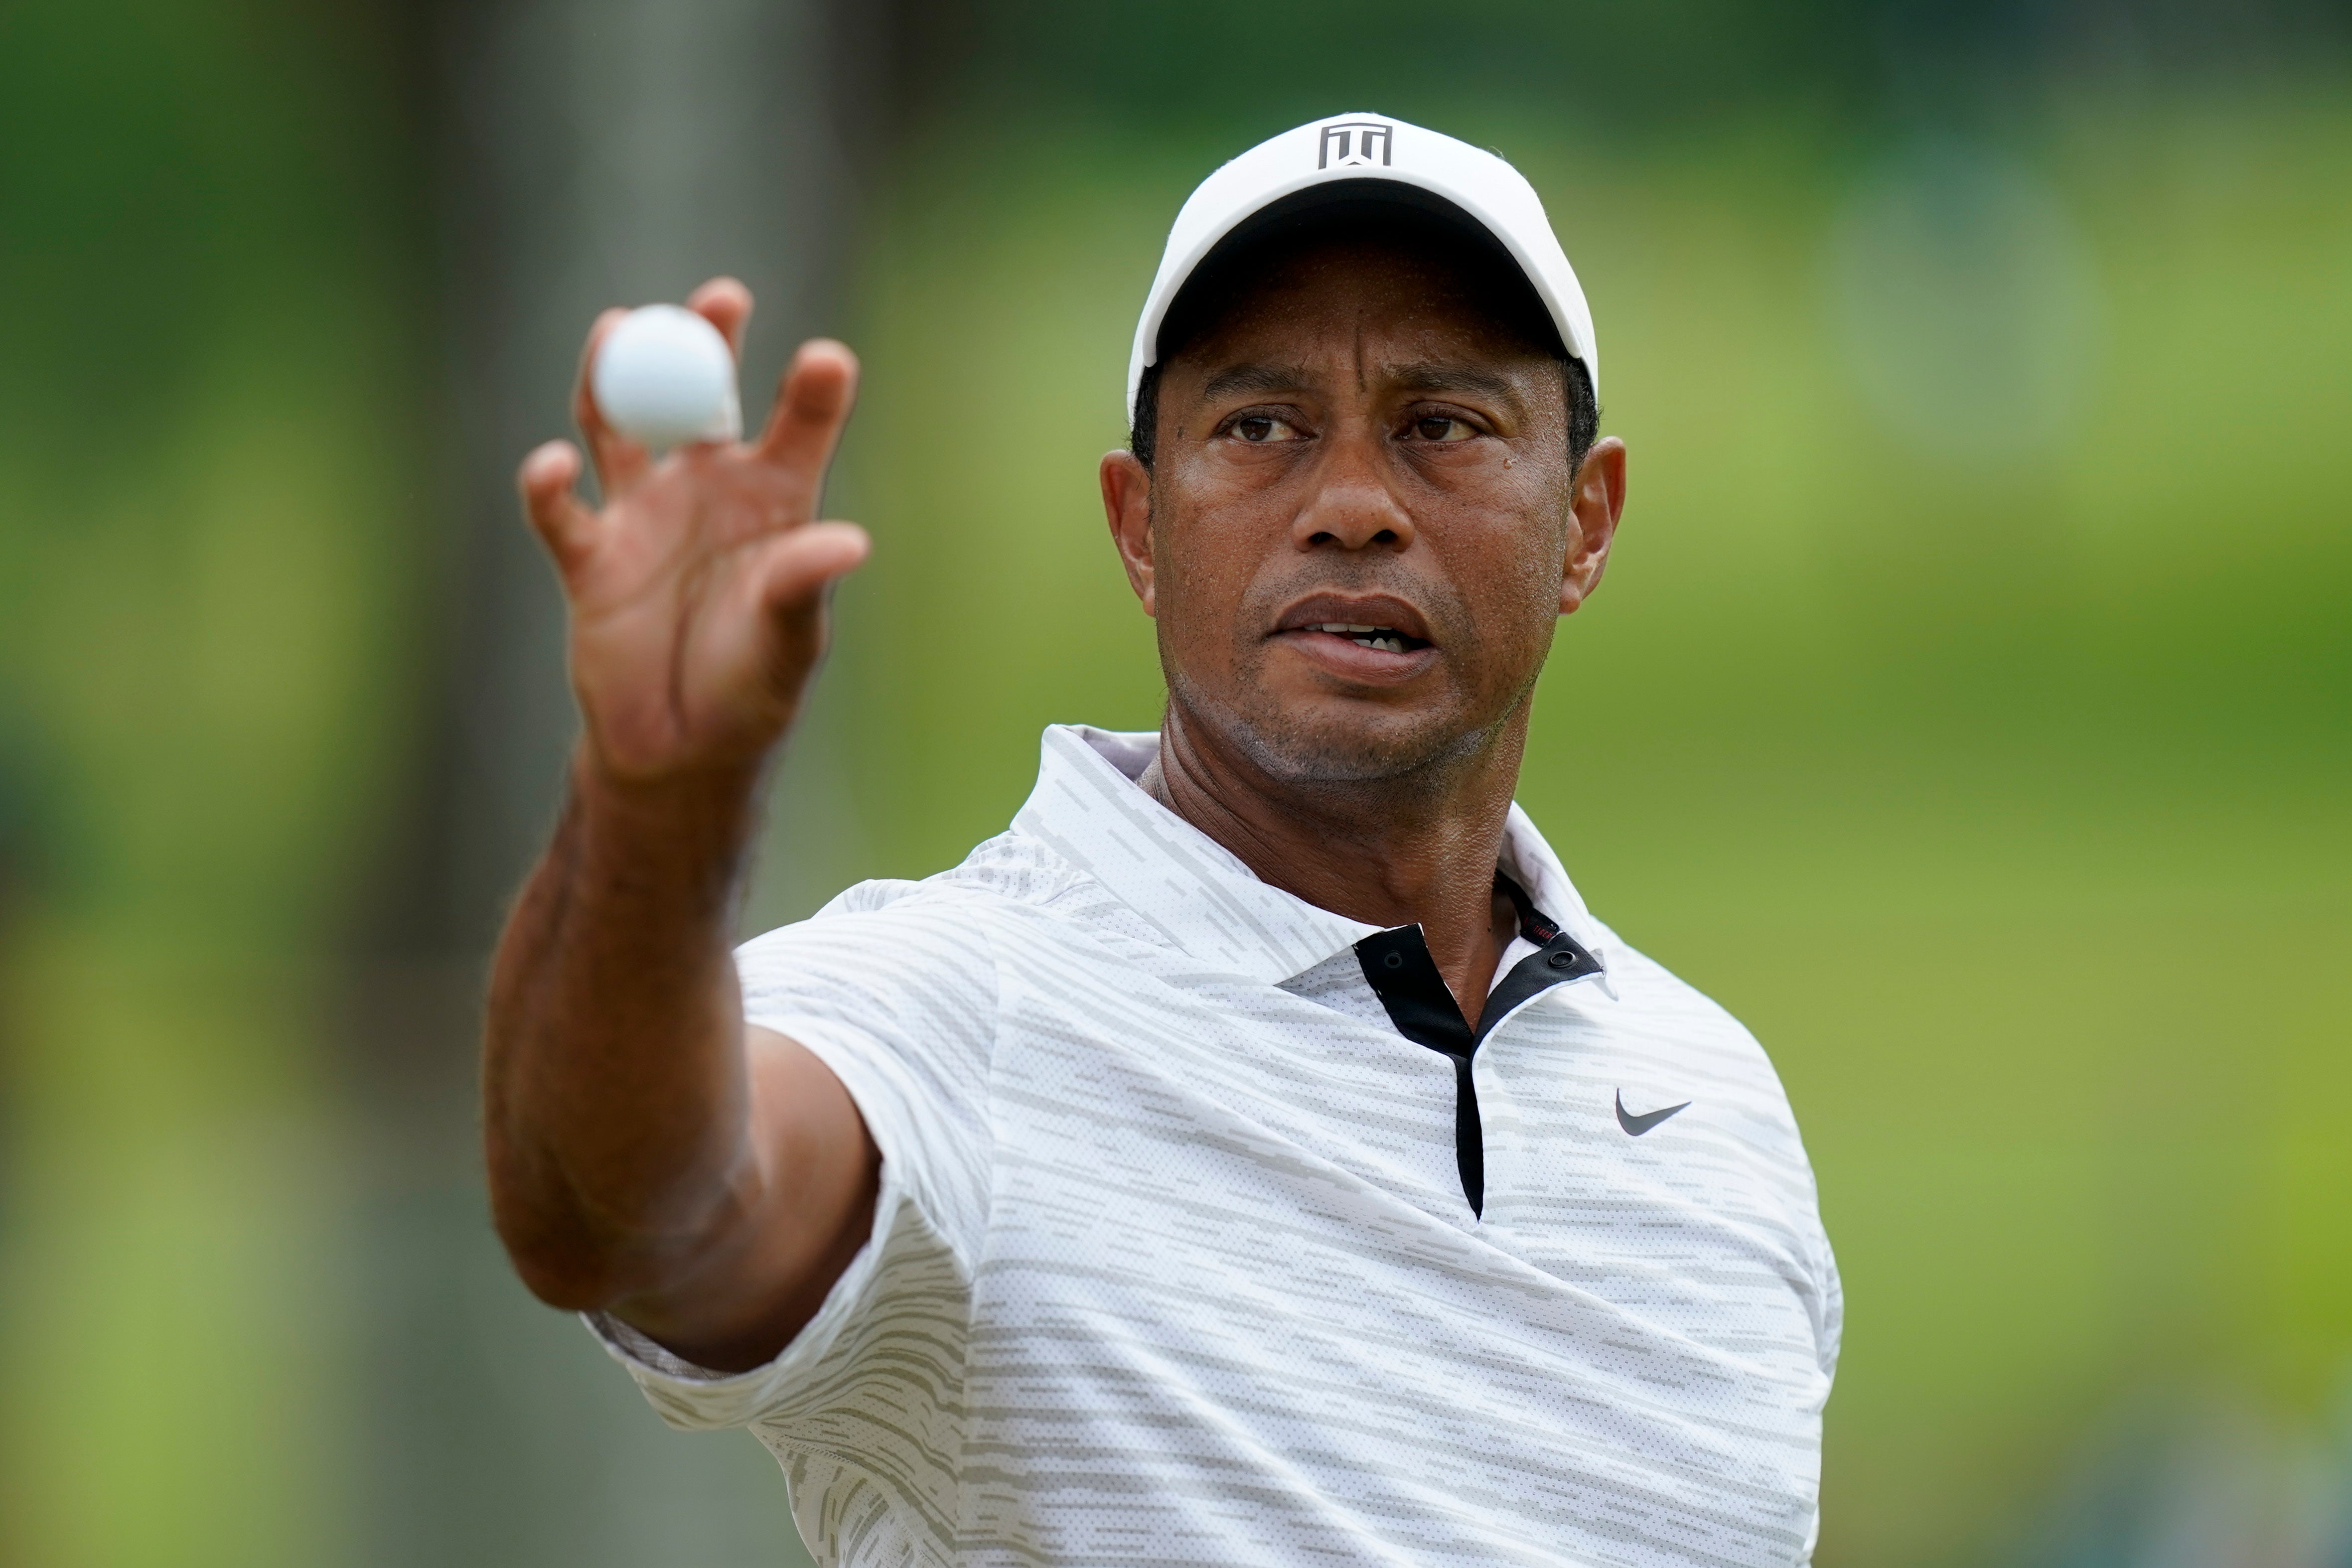 independent.co.uk - Phil Casey - 'He has his opinion, I have mine': Tiger Woods on Phil Mickelson controversy